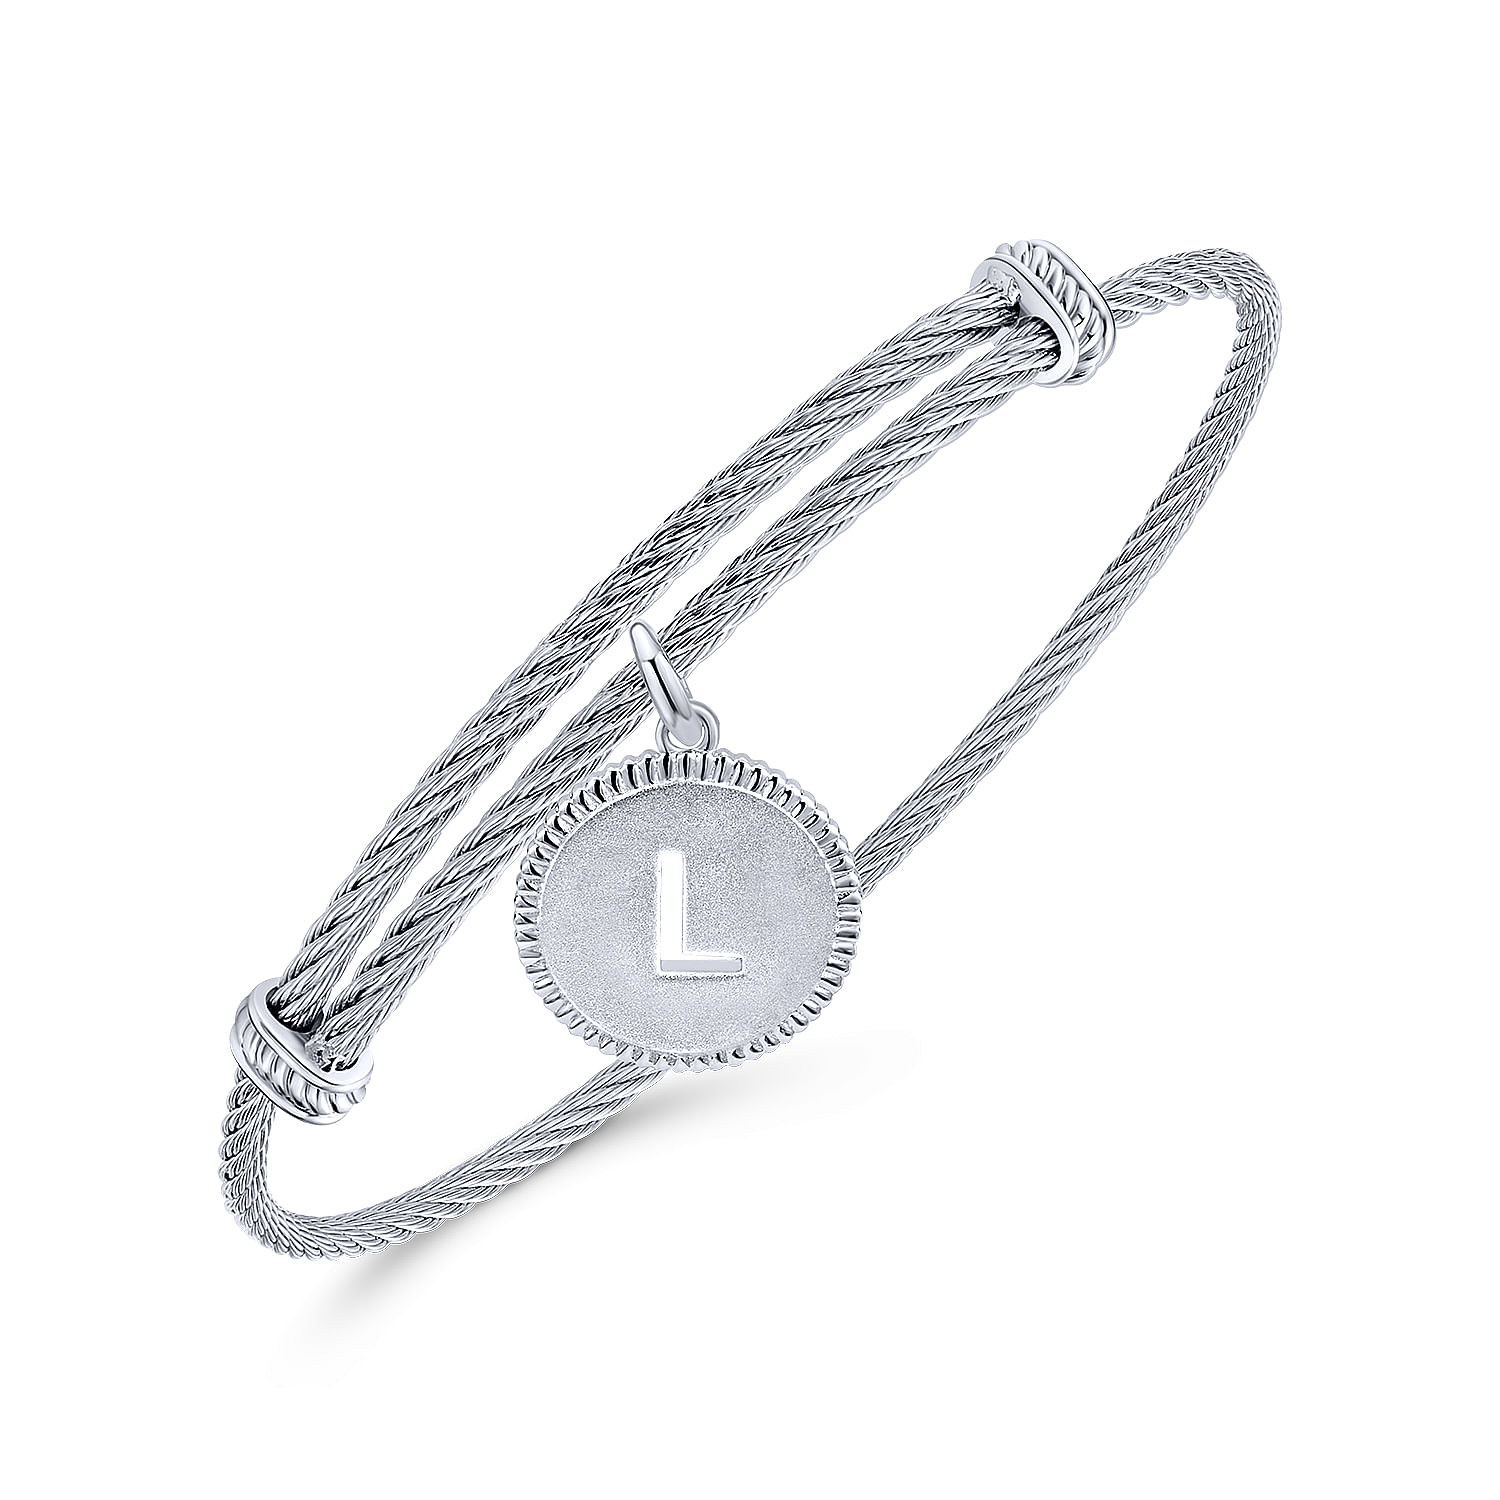 Adjustable-Twisted-Cable-Stainless-Steel-Bangle-with-Sterling-Silver-L-Initial-Charm2